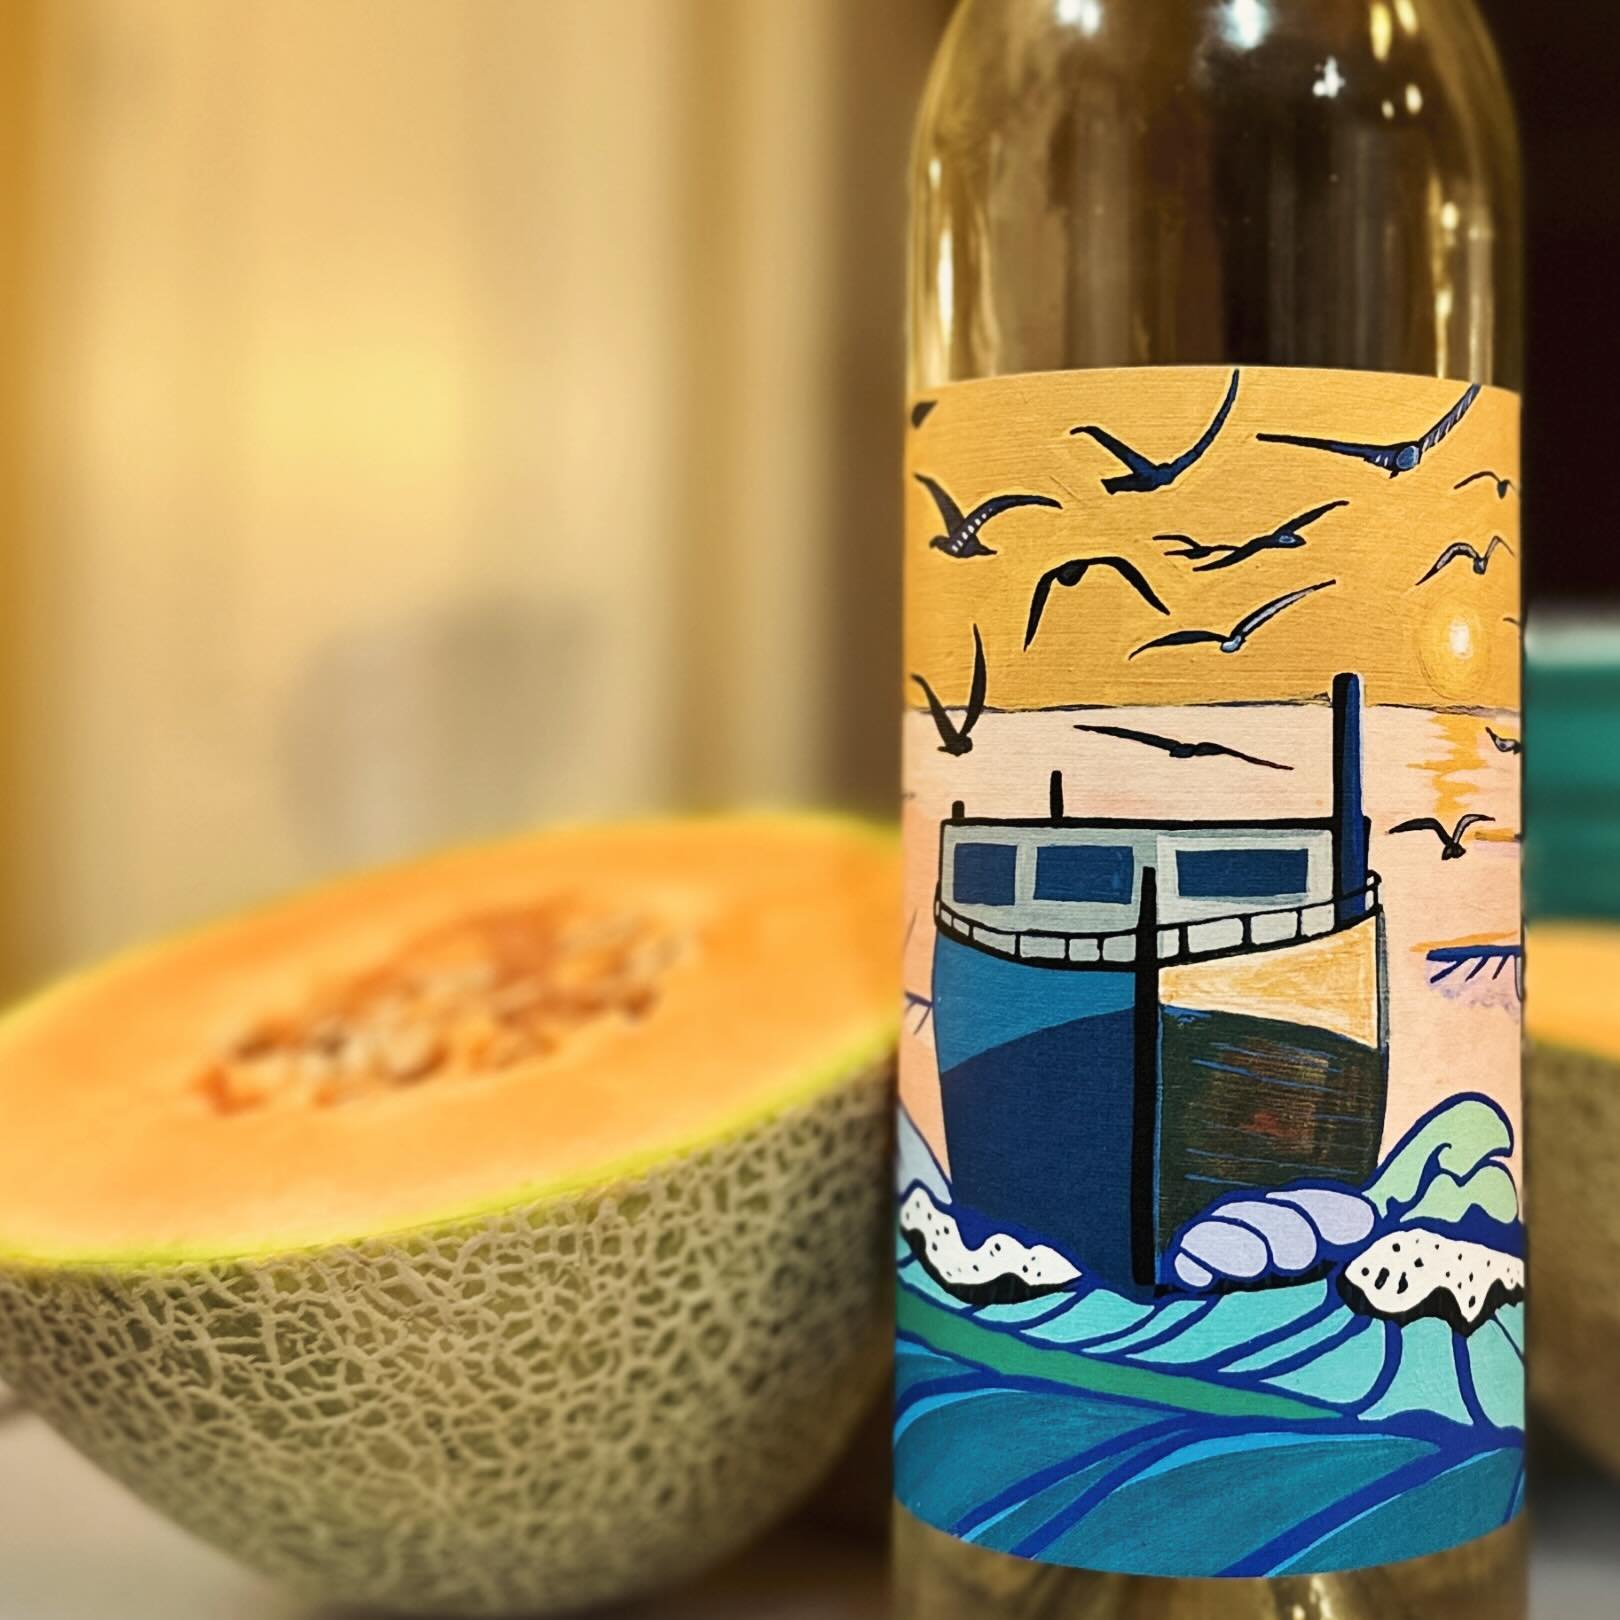 🆕 NEW WINE RELEASE

2023 Itasca &bull; Wisconsin Ledge AVA

Dry, aromatic white wine with notes of melon and golden kiwi. Limited production: 34 cases. 🍈 🥝 

Available in the tasting room now!
Friday 11a-4p &bull; Saturday 11a-5p &bull; Sunday 11a